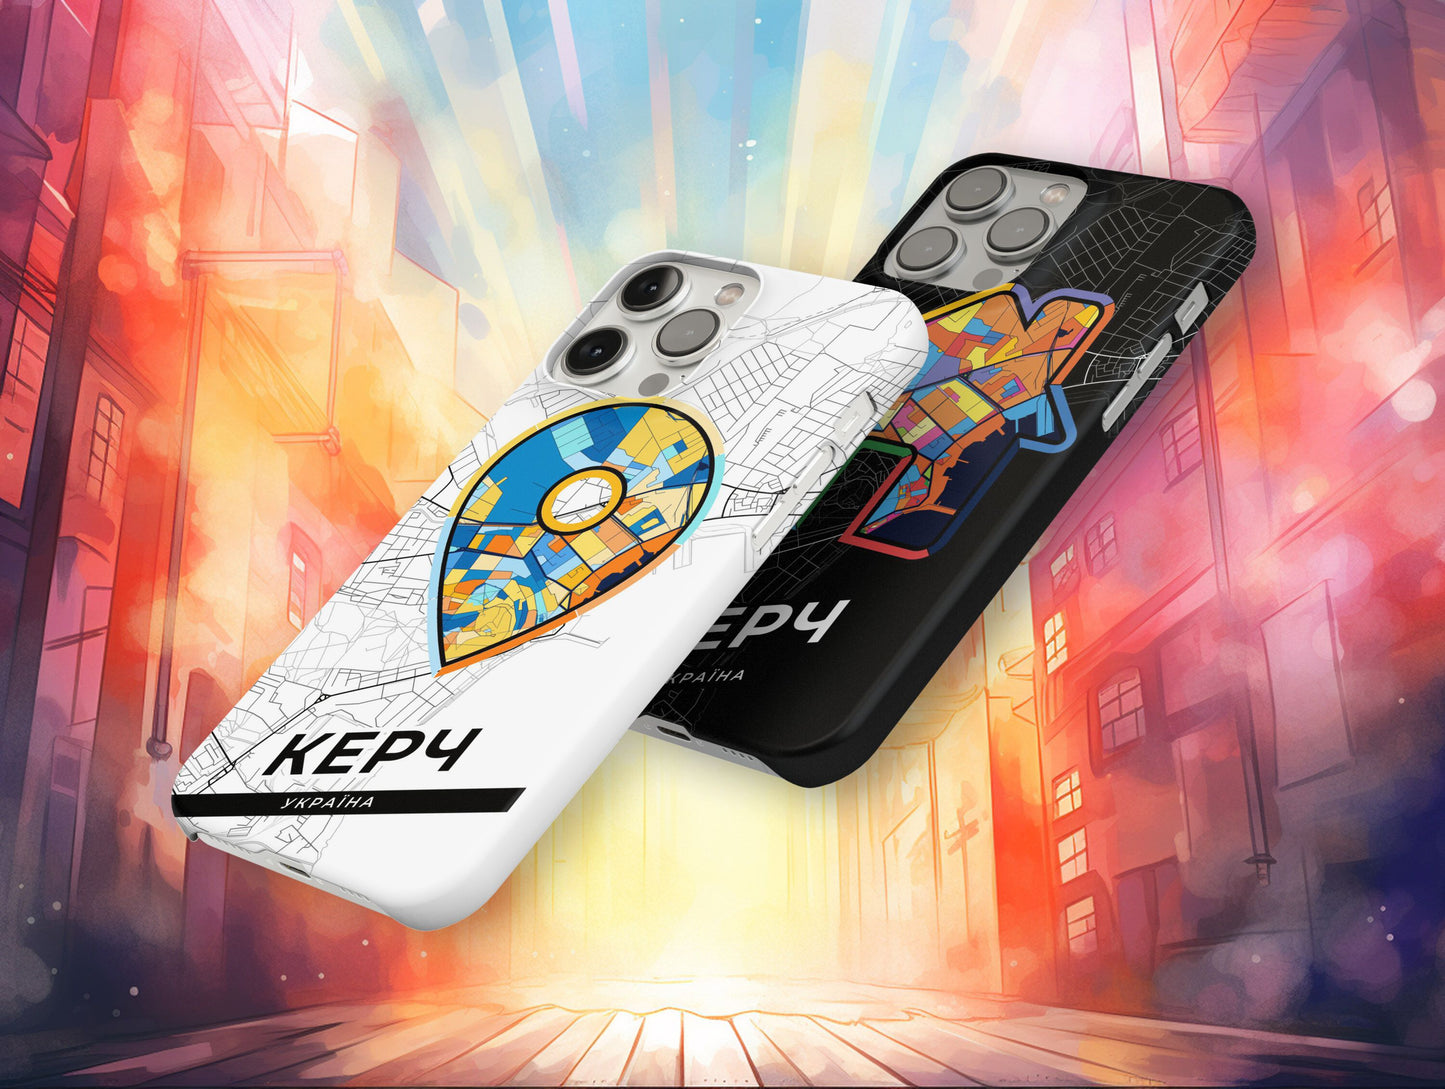 Kerch Ukraine slim phone case with colorful icon. Birthday, wedding or housewarming gift. Couple match cases.